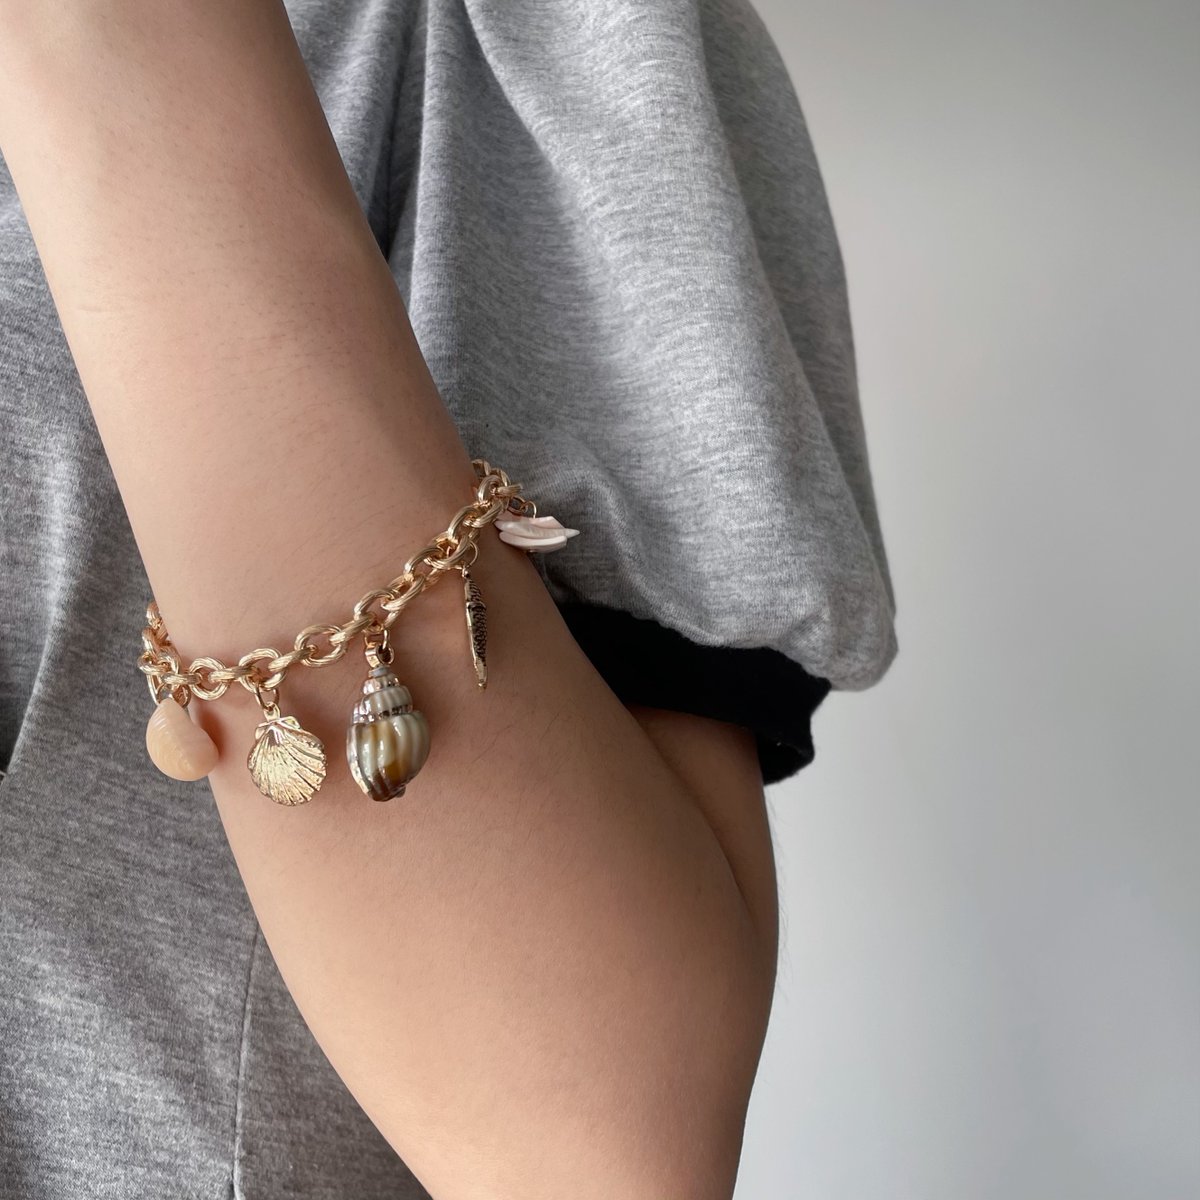 Brighten up your look with this summertime essential - the SHELL BRACELET! This delightful accessory will give your outfit a beachy touch with its seaside inspired design. Get ready to feel all of the ocean vibes! 🌊🏄‍♀️#bracelet #holidayjewelry #shellbracelet #braceletwholesale